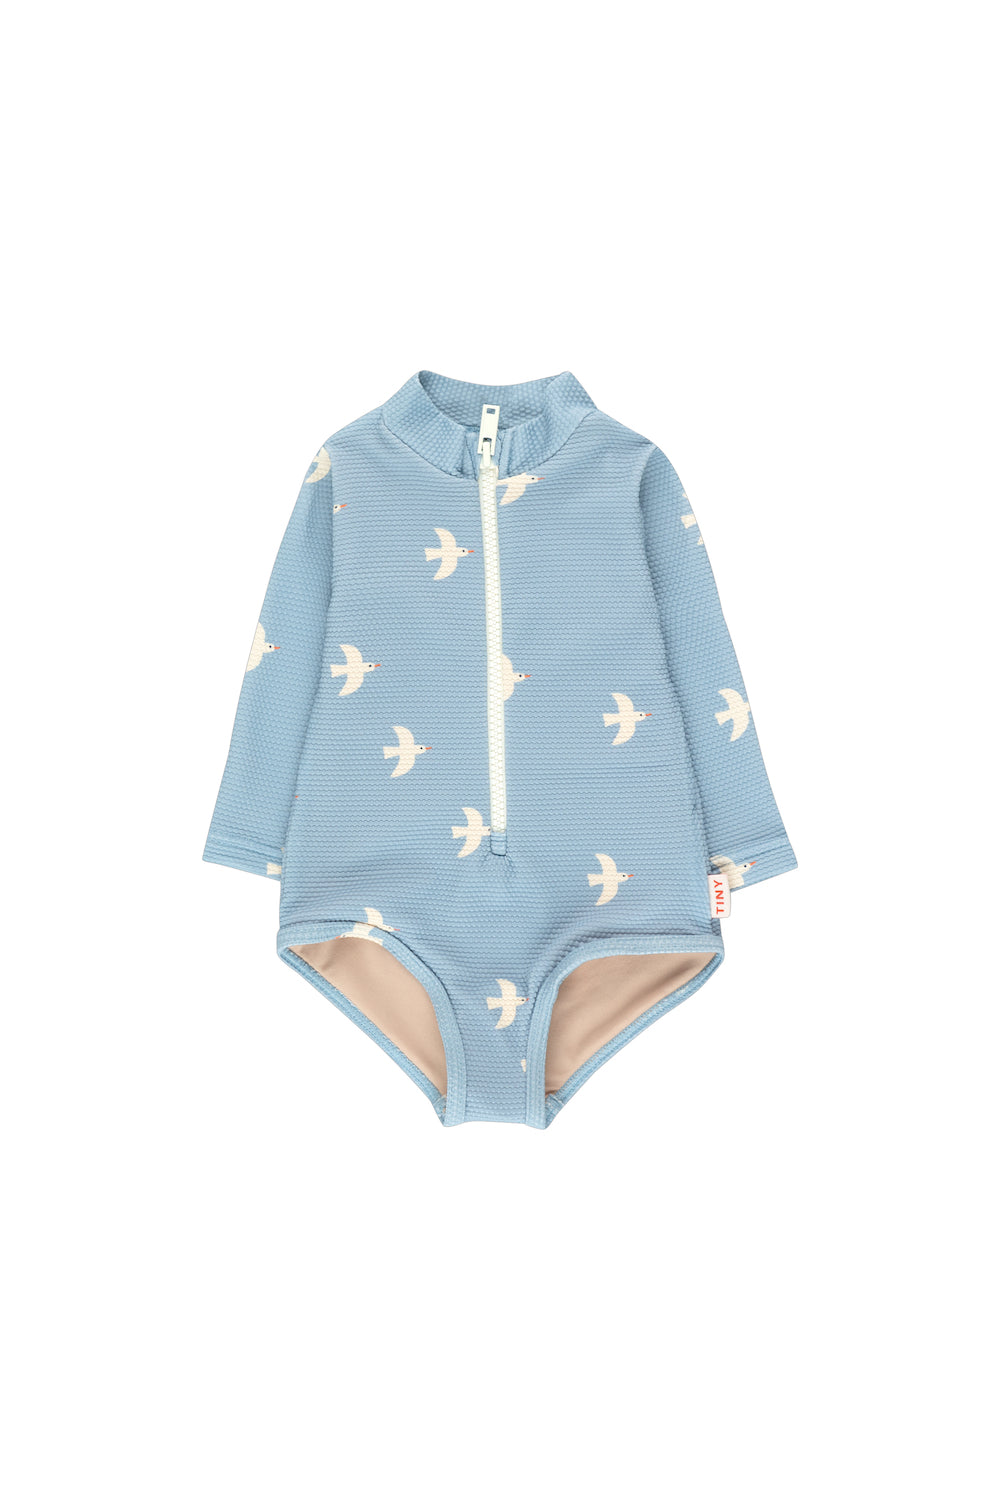 Tiny Cottons Birds Long Sleeve One Piece - Washed Blue / Light Cream